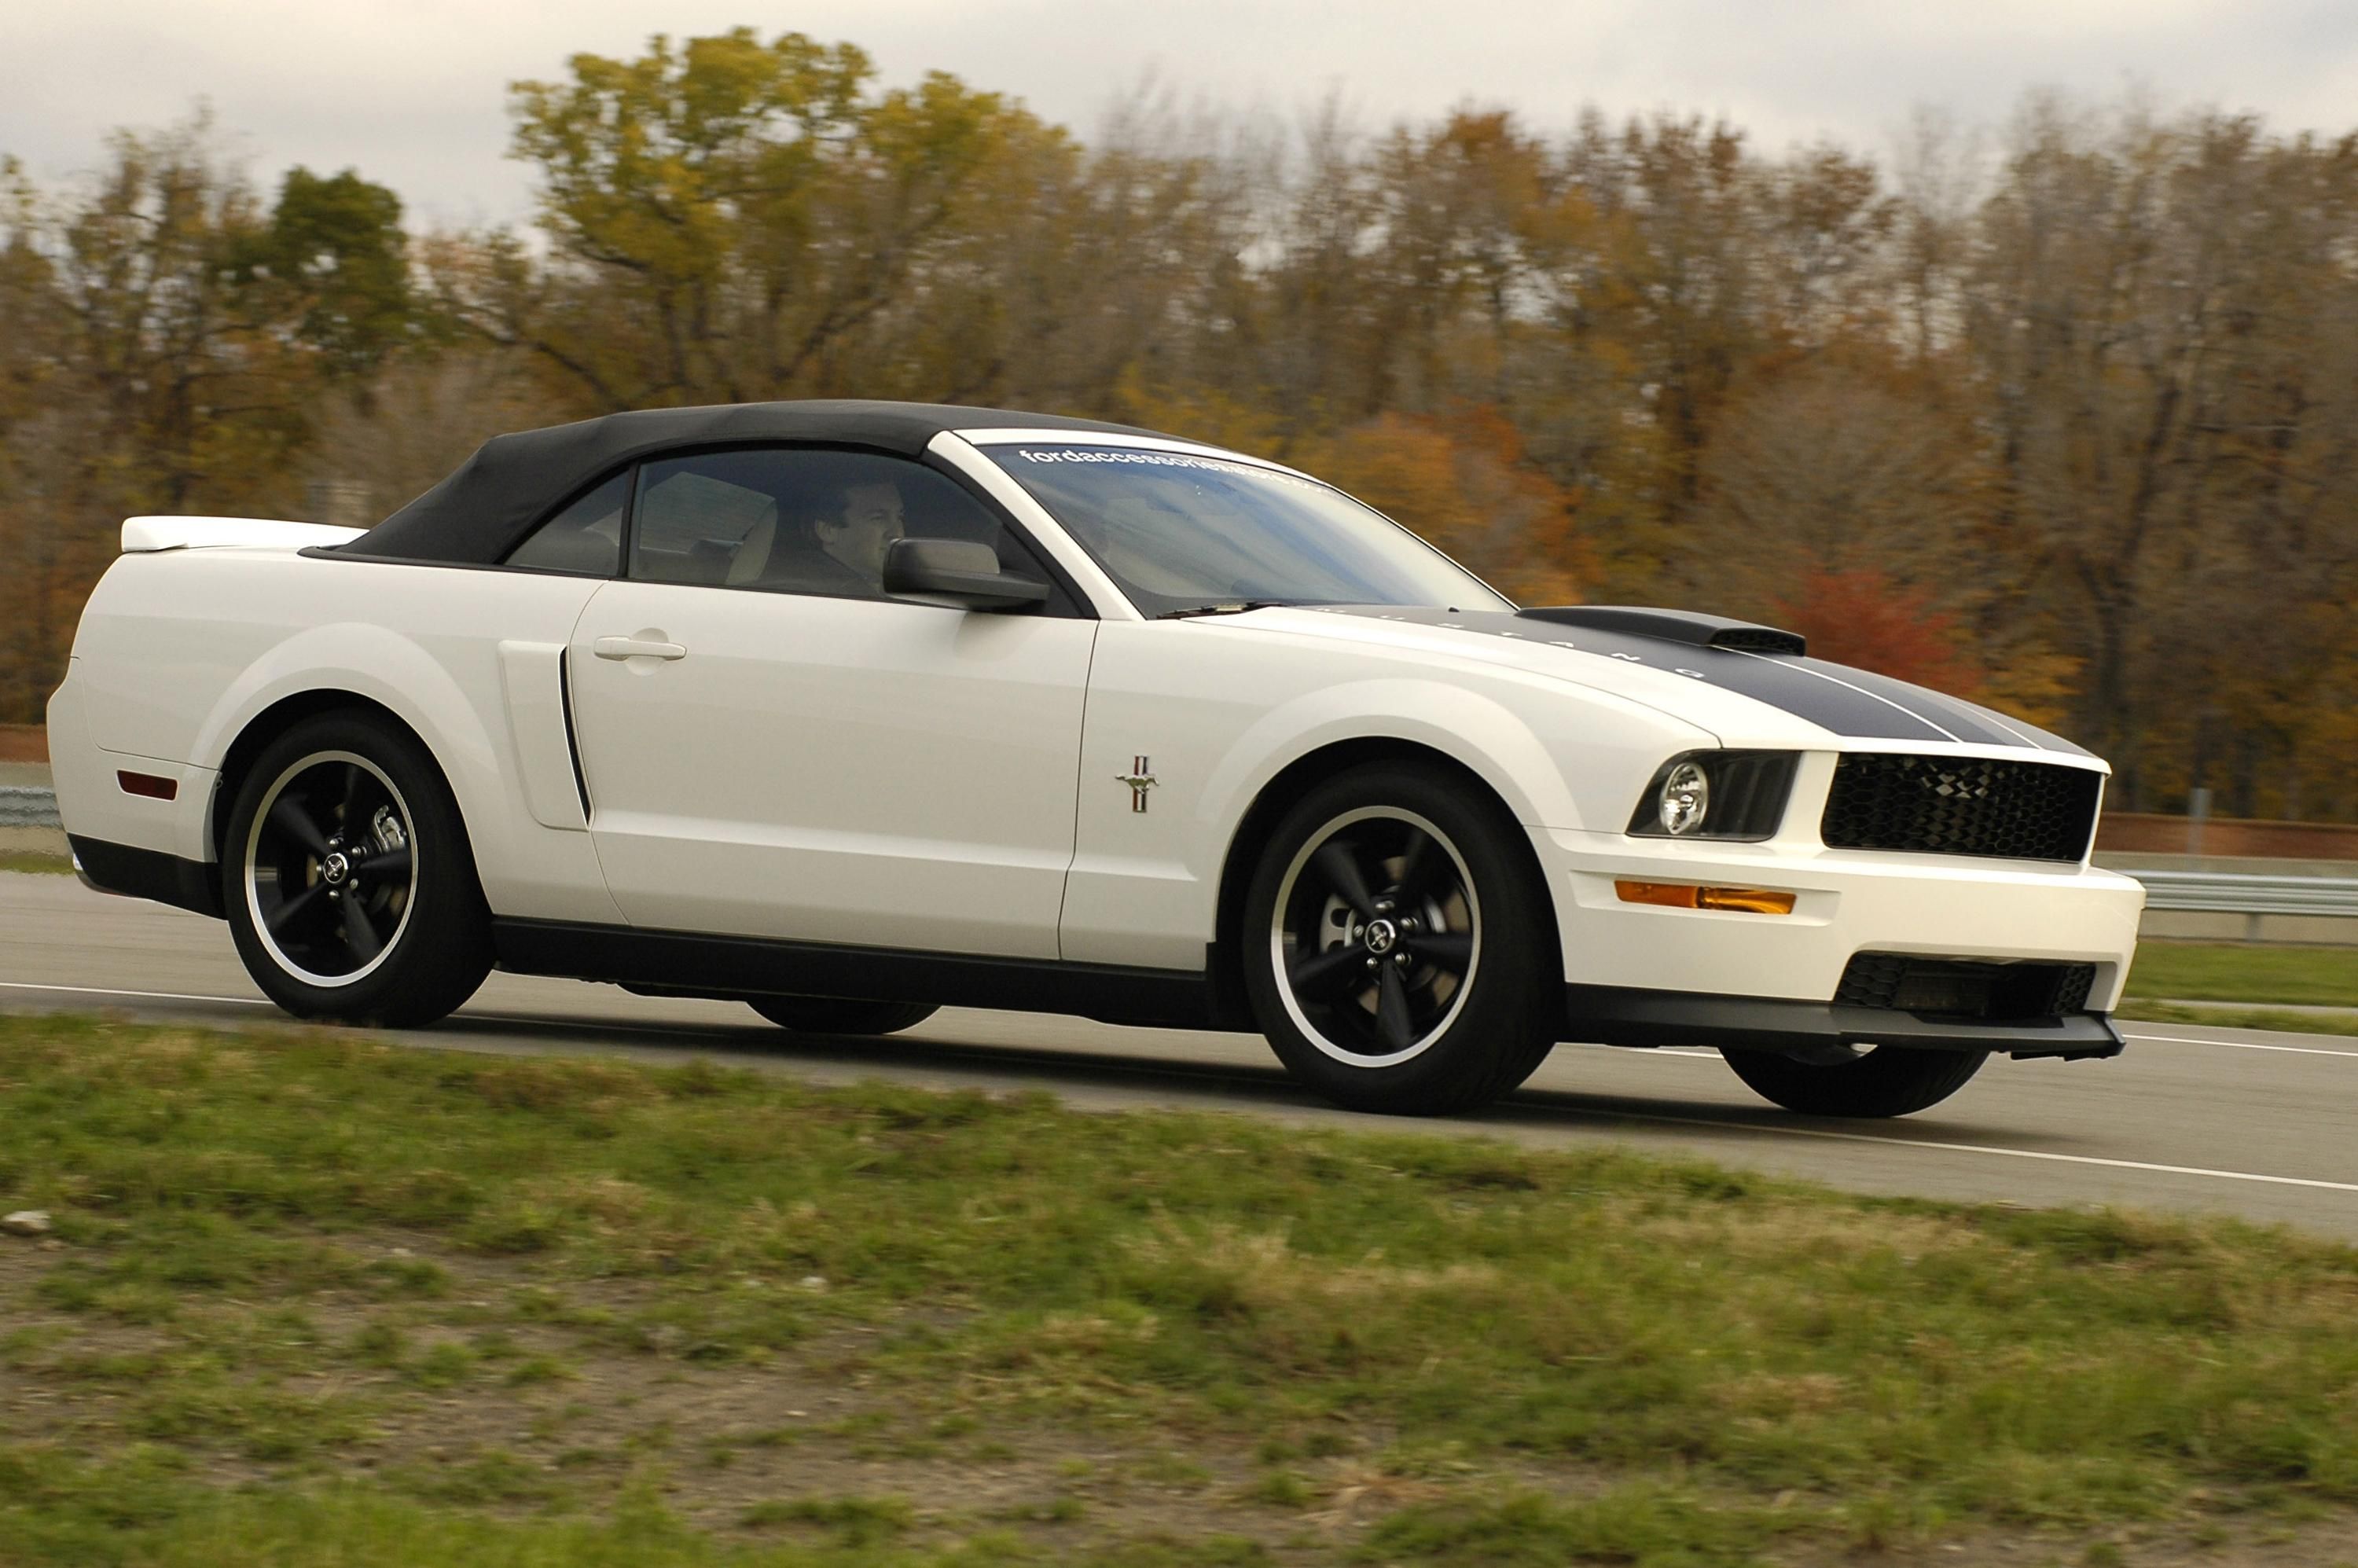 2007 Ford Project Mustang GT